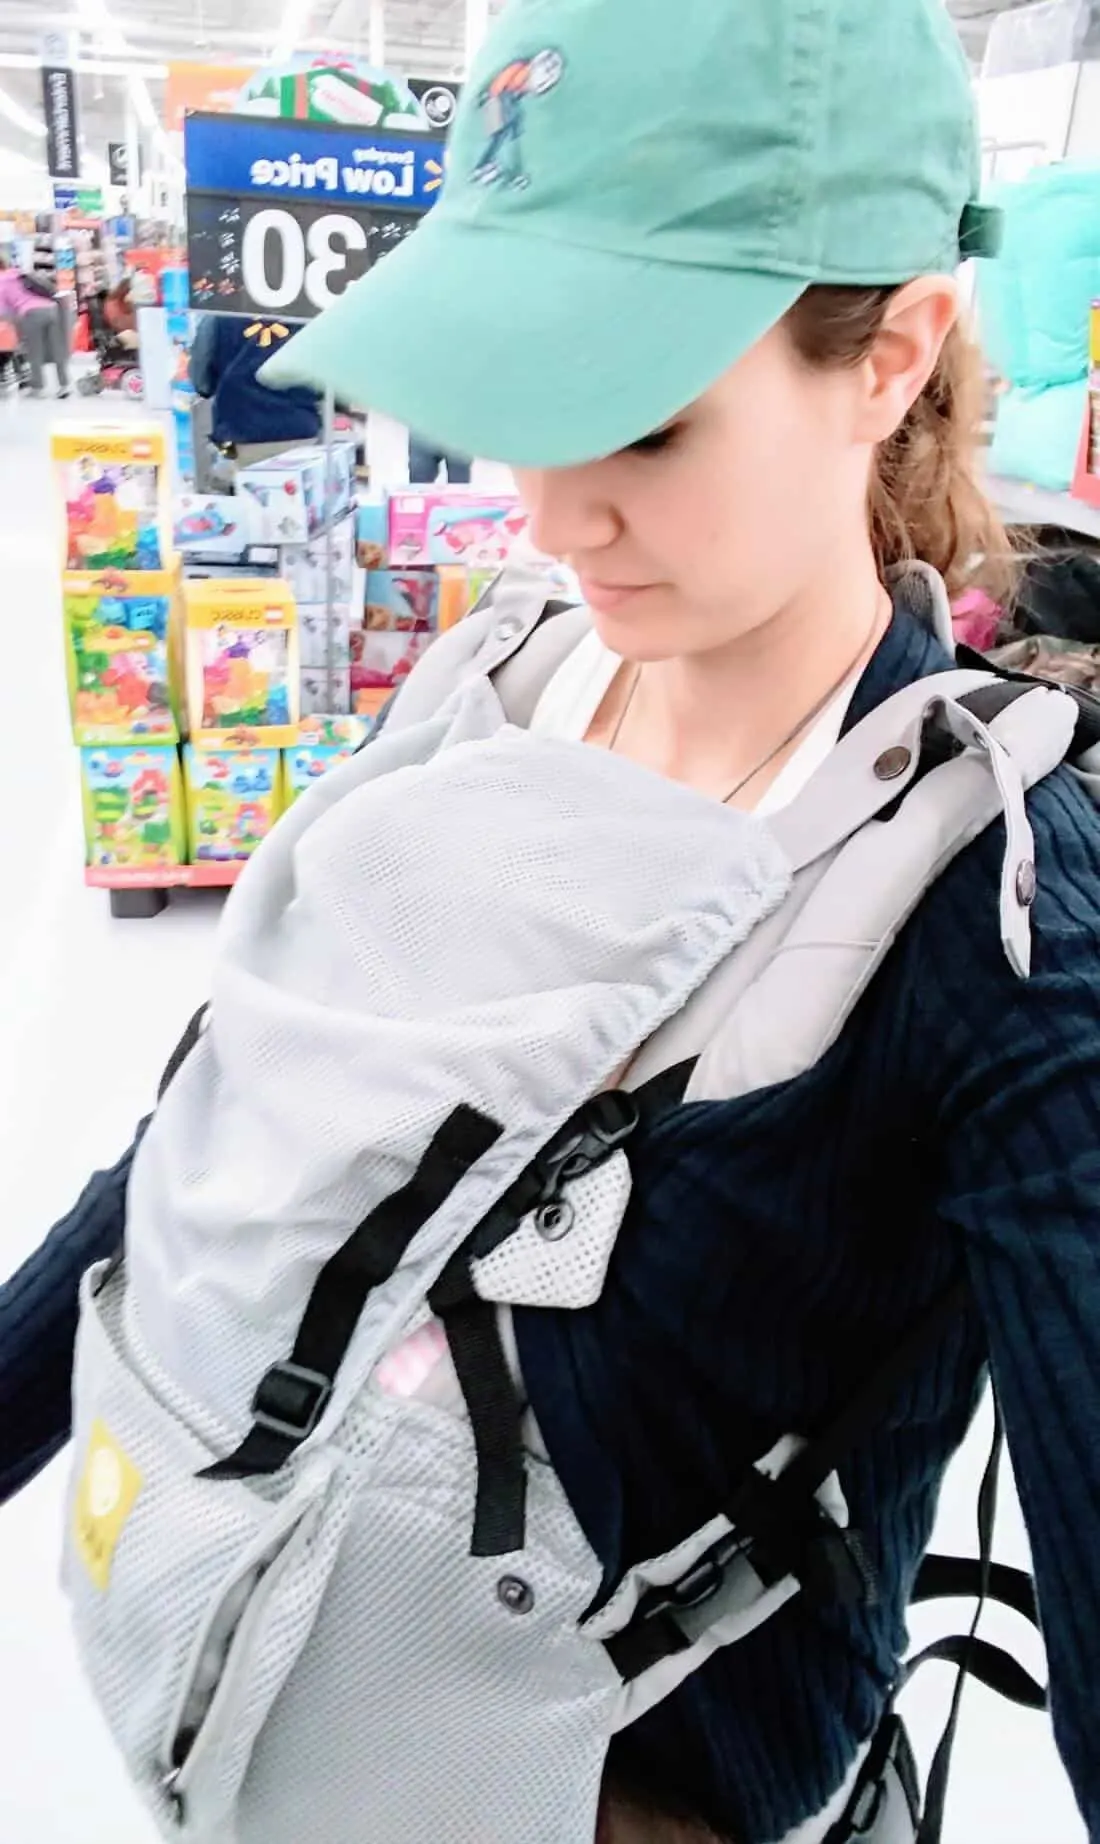 Mom wears baby in carrier at store.